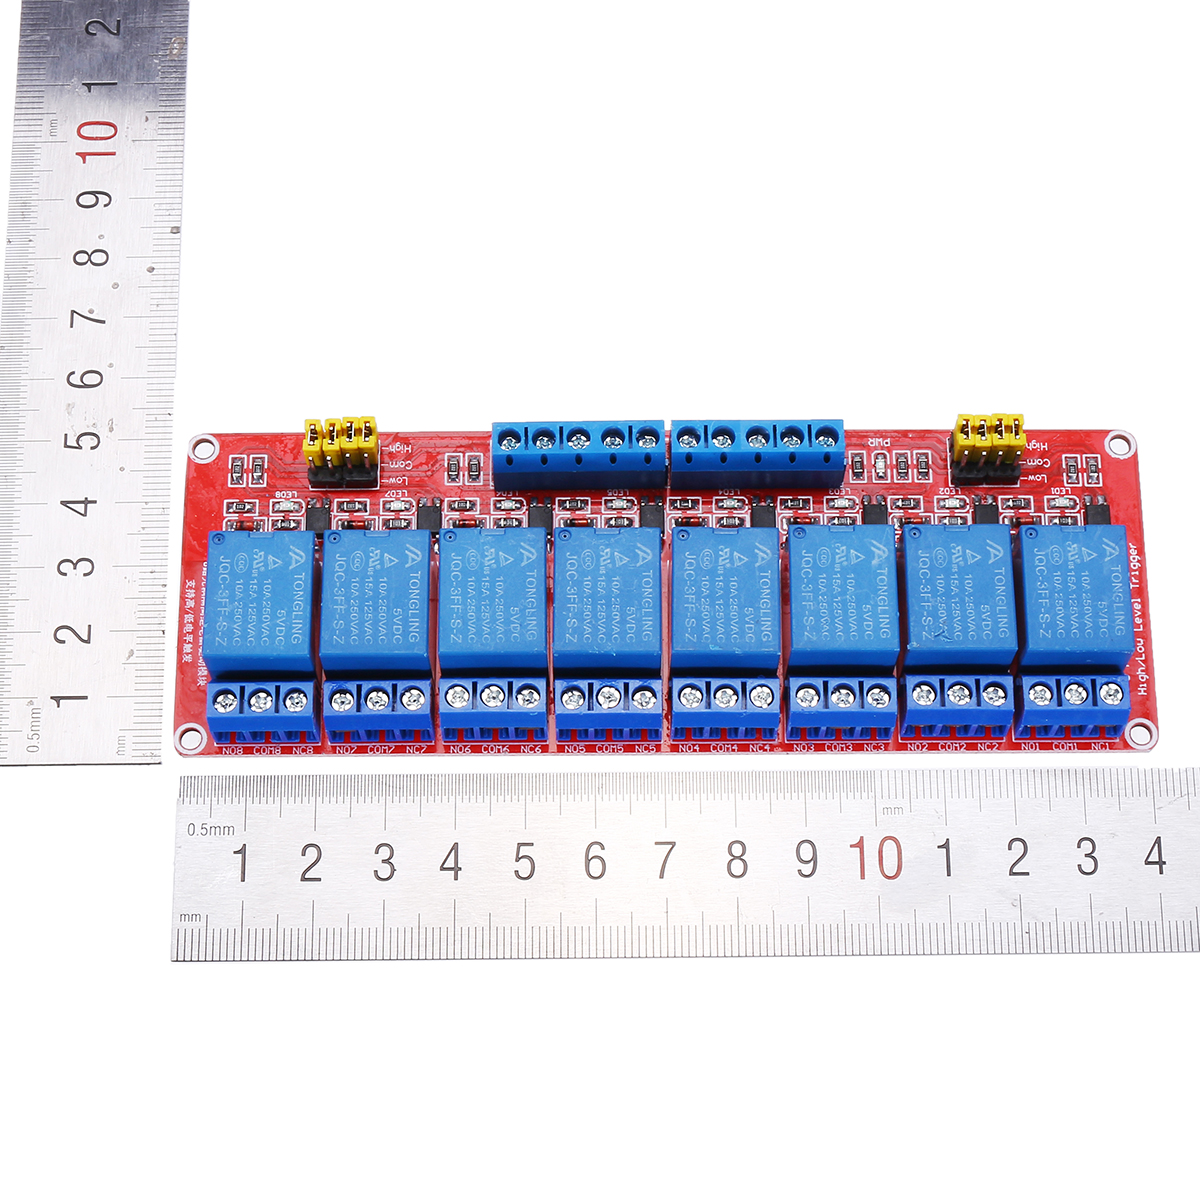 5V 1 / 2 / 4 / 8 Channel Relay High Low Level Optocoupler Module for PI